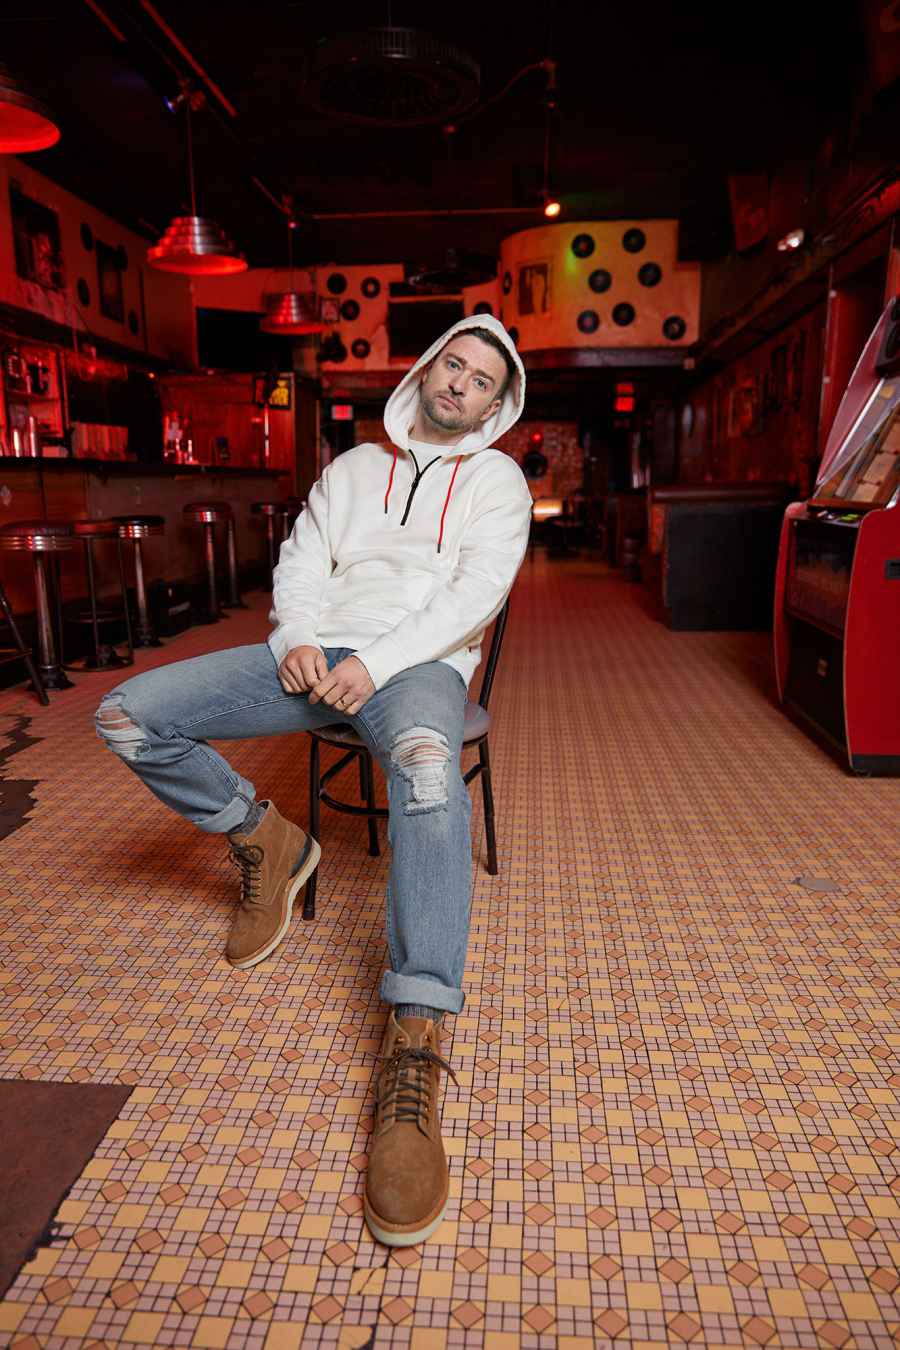 Justin Timberlake Celebrates His Memphis Roots With His Spring 2019 Levi's Collection